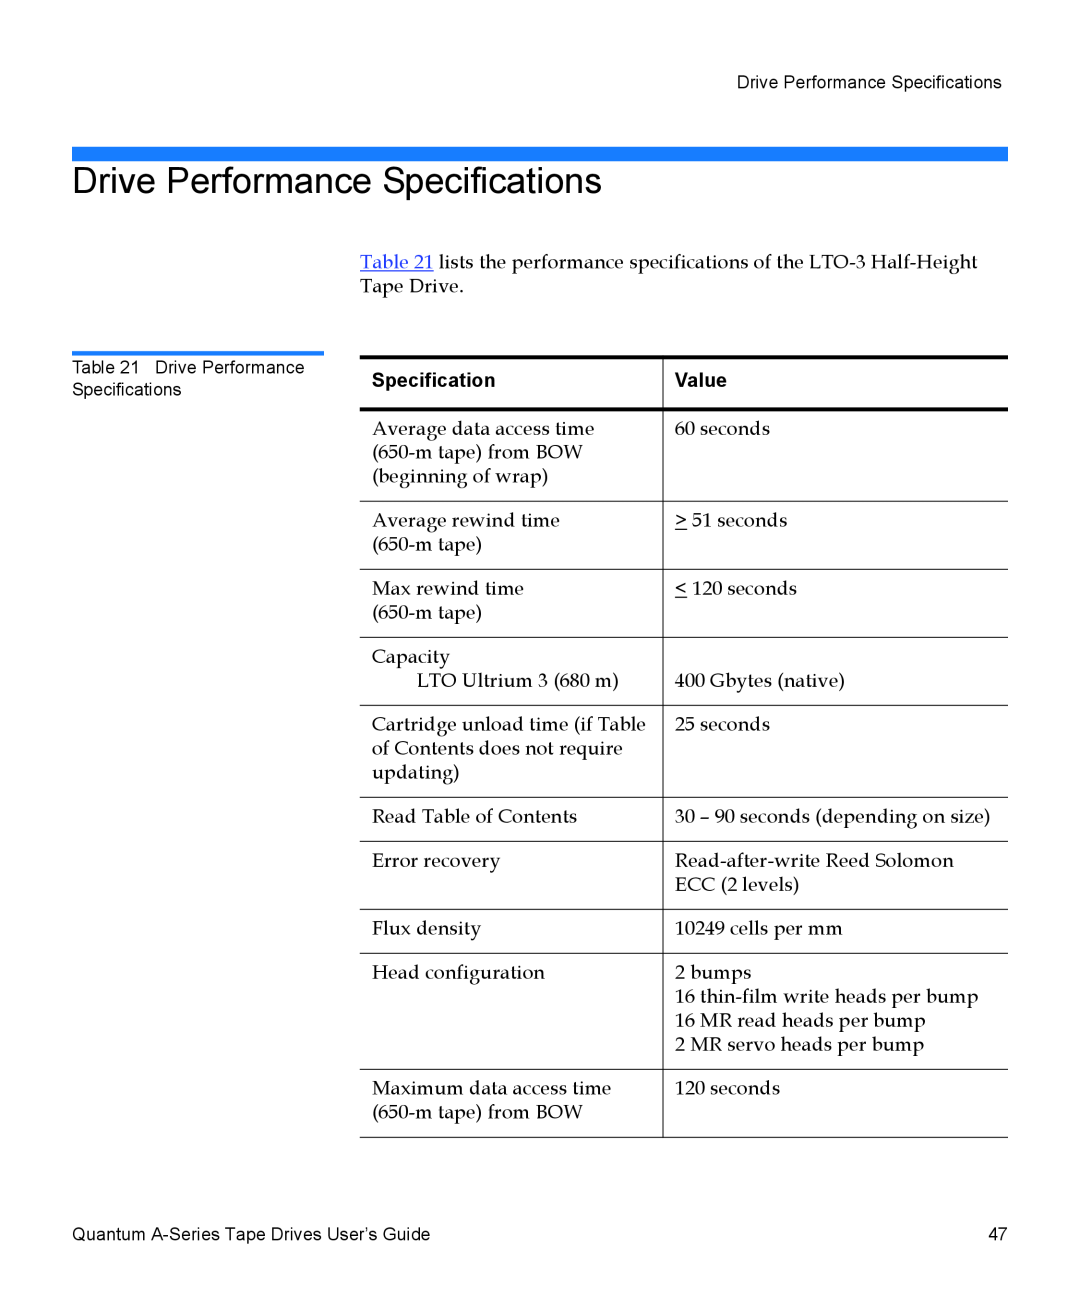 Quantum A-Series manual Drive Performance Specifications, Value 